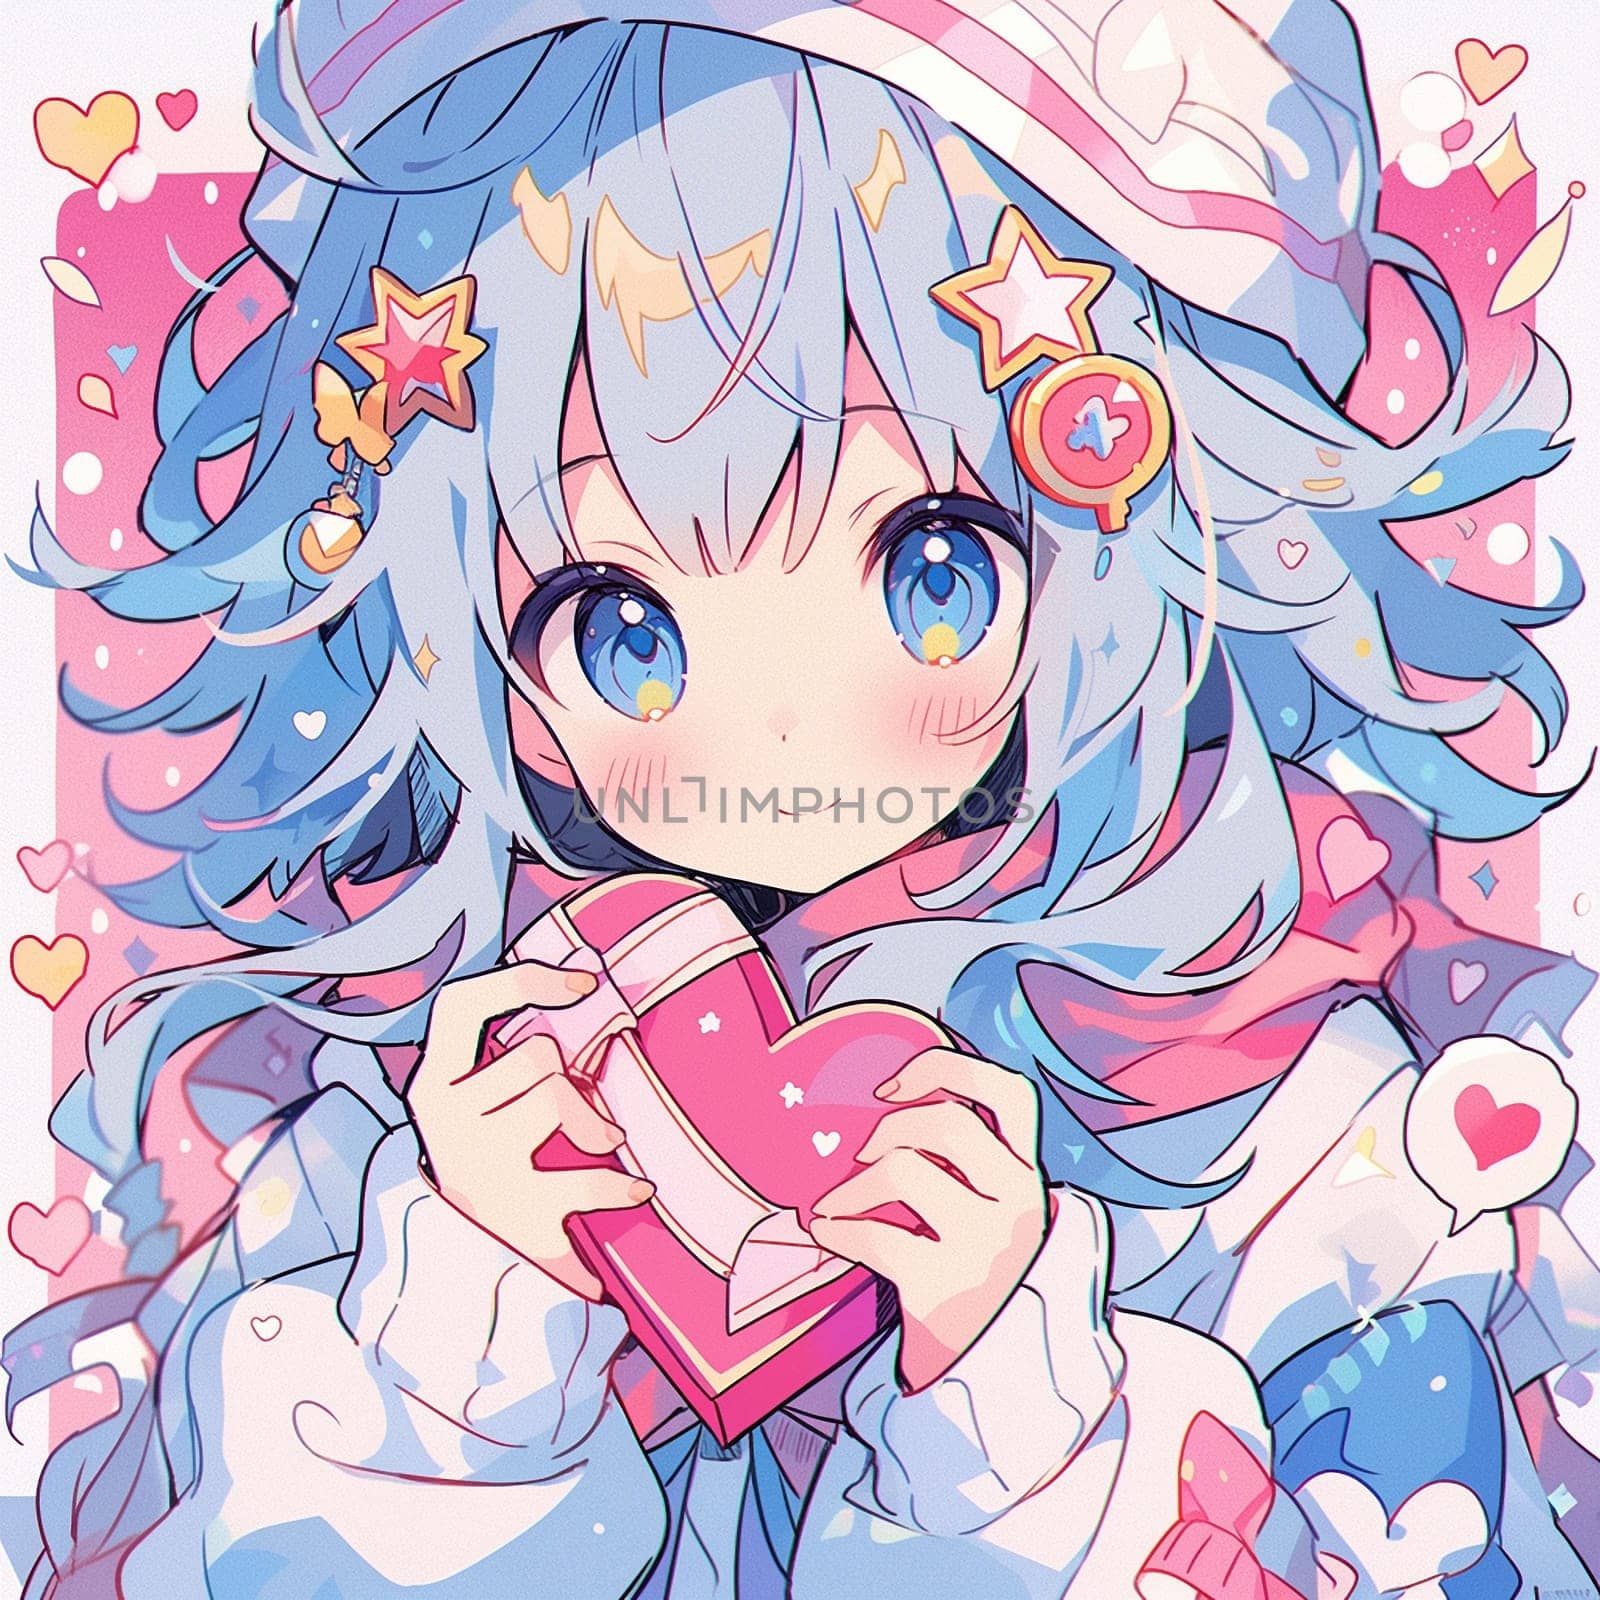 A beautiful girl full of love in the Anime style. A beautiful drawing for Valentine's Day by NeuroSky